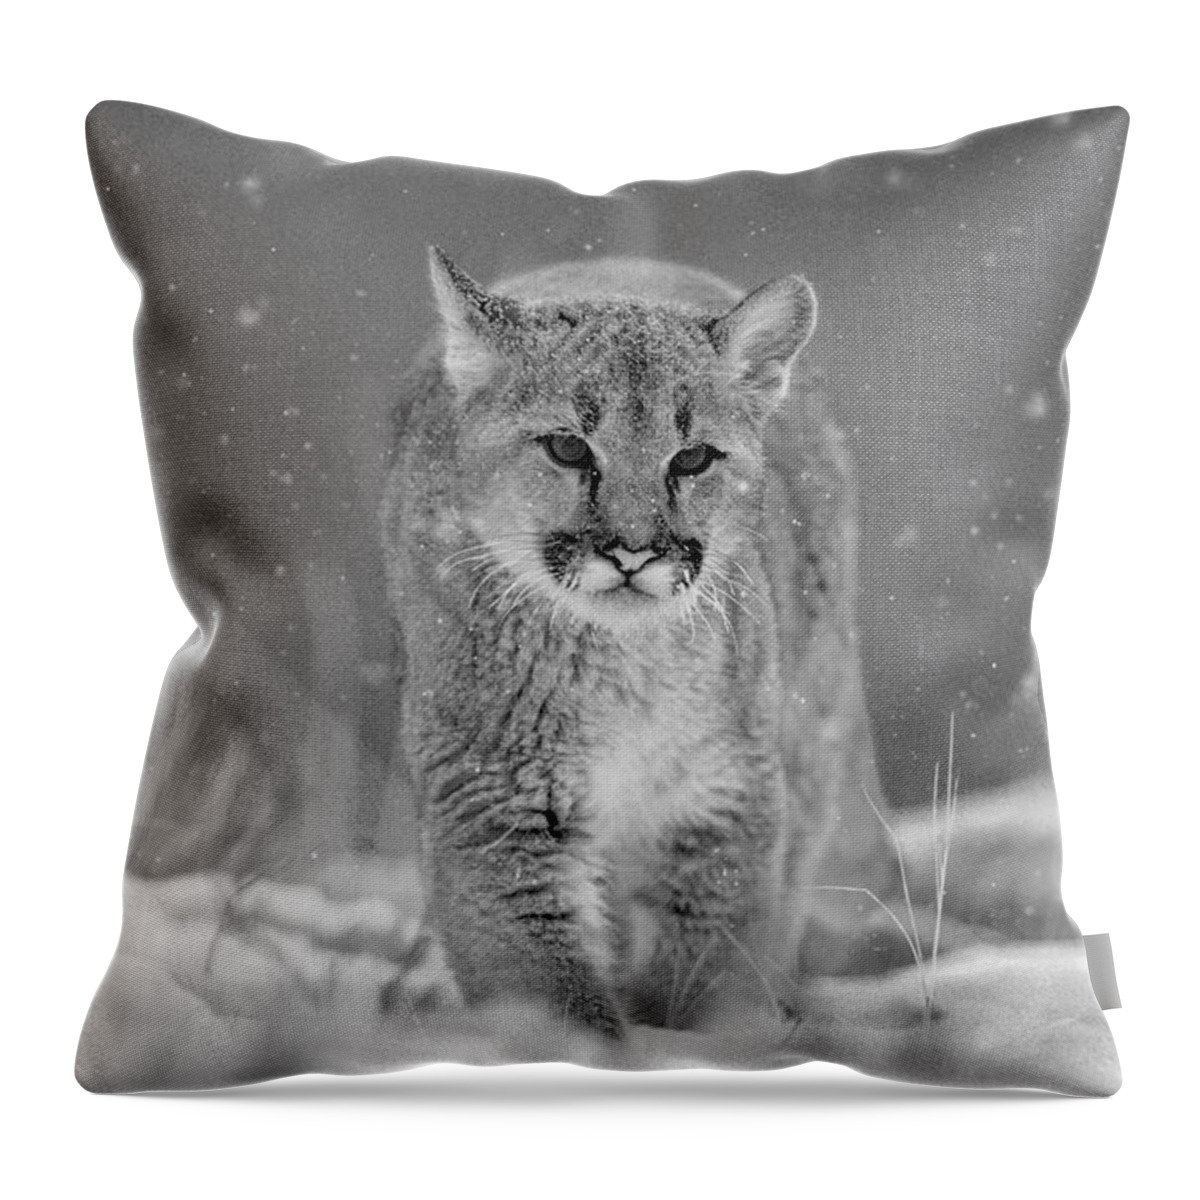 Disk1215 Throw Pillow featuring the photograph Mountain Lion Cub In Snow by Tim Fitzharris